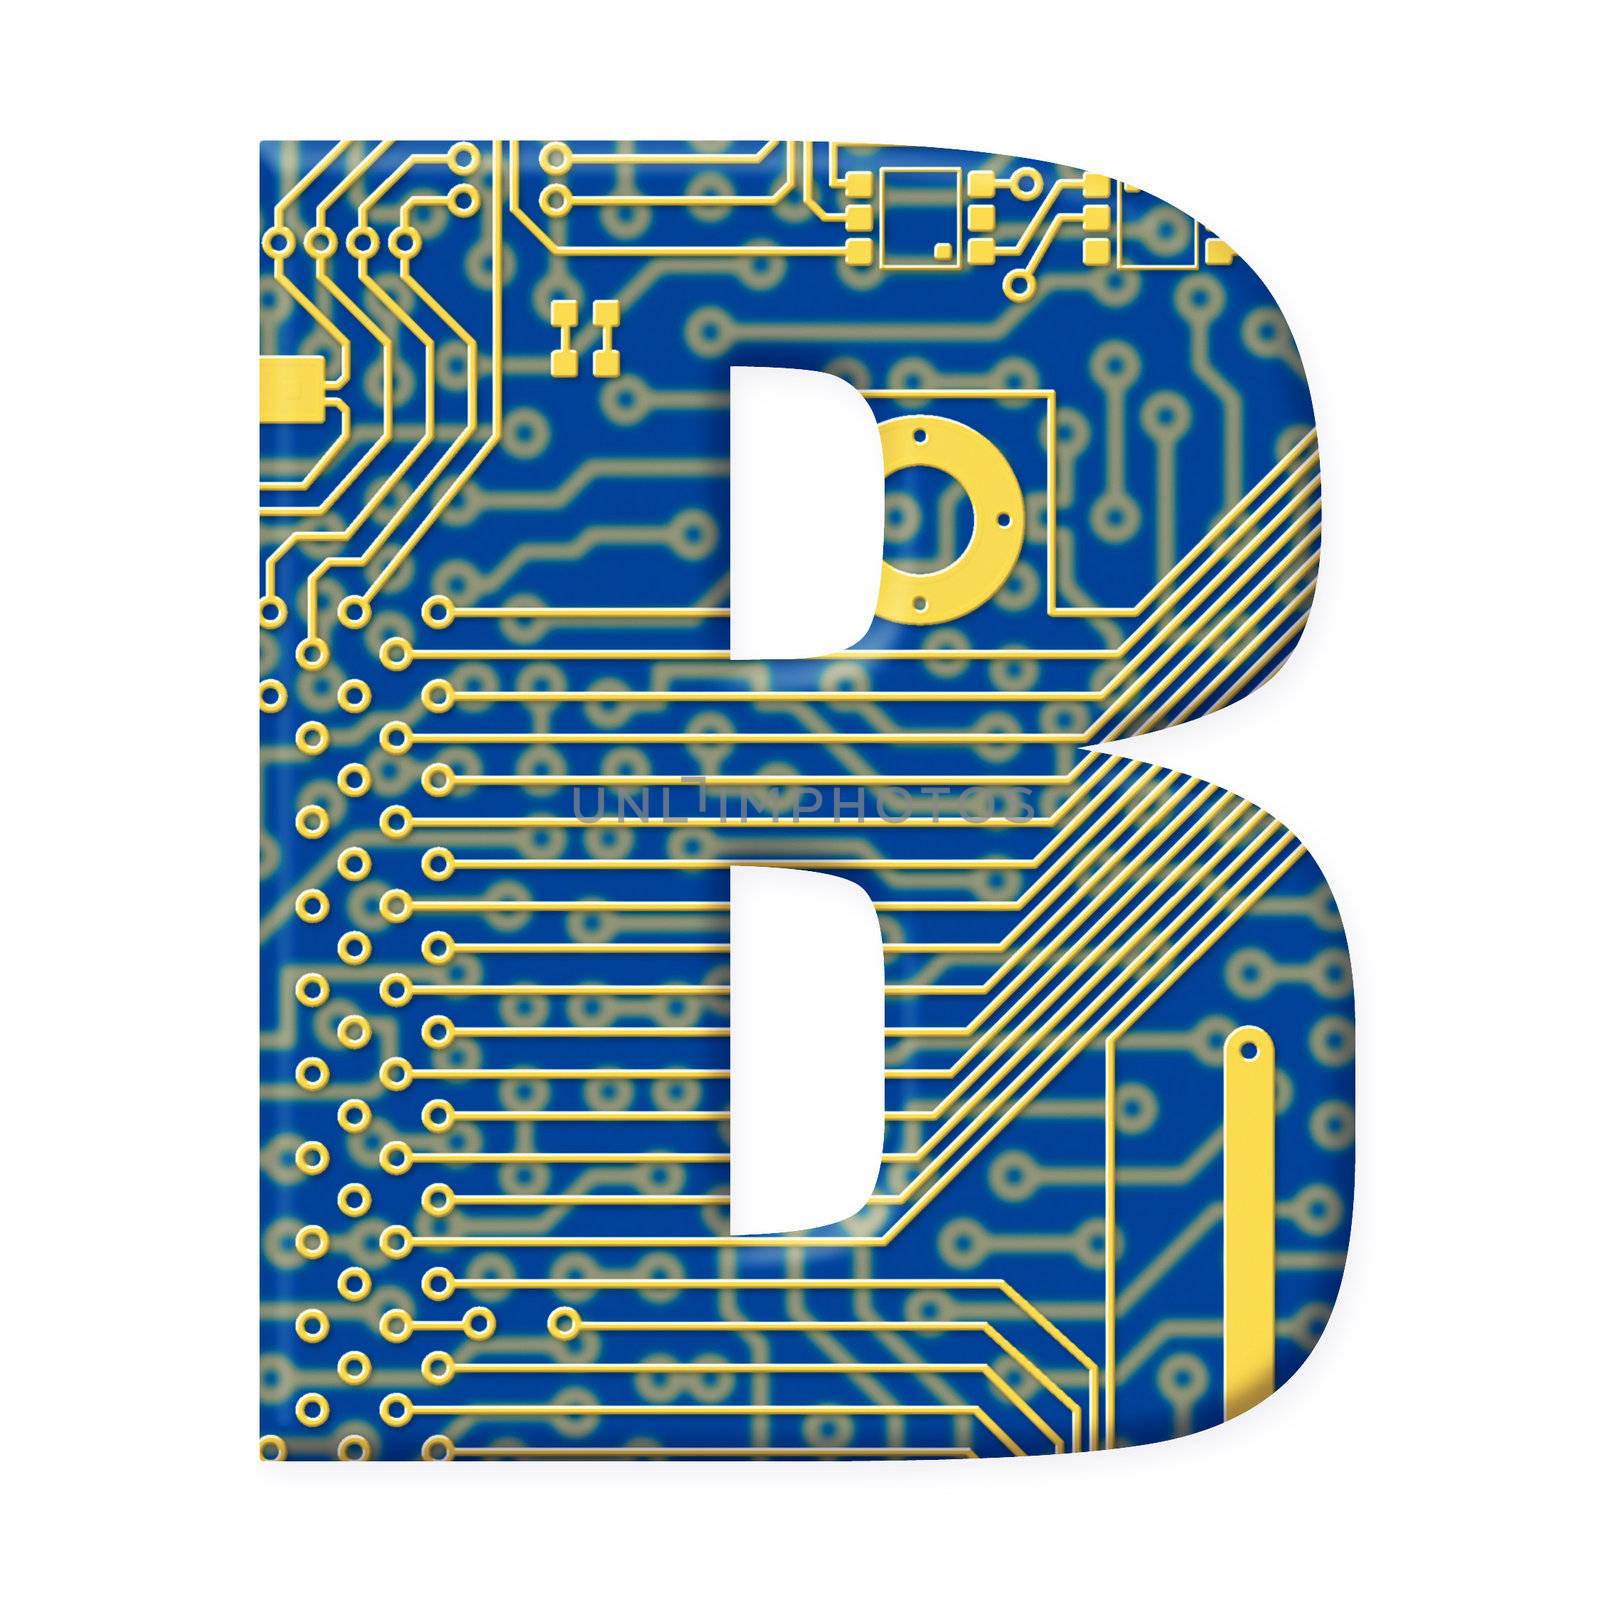 One letter from the electronic technology circuit board alphabet on a white background - B